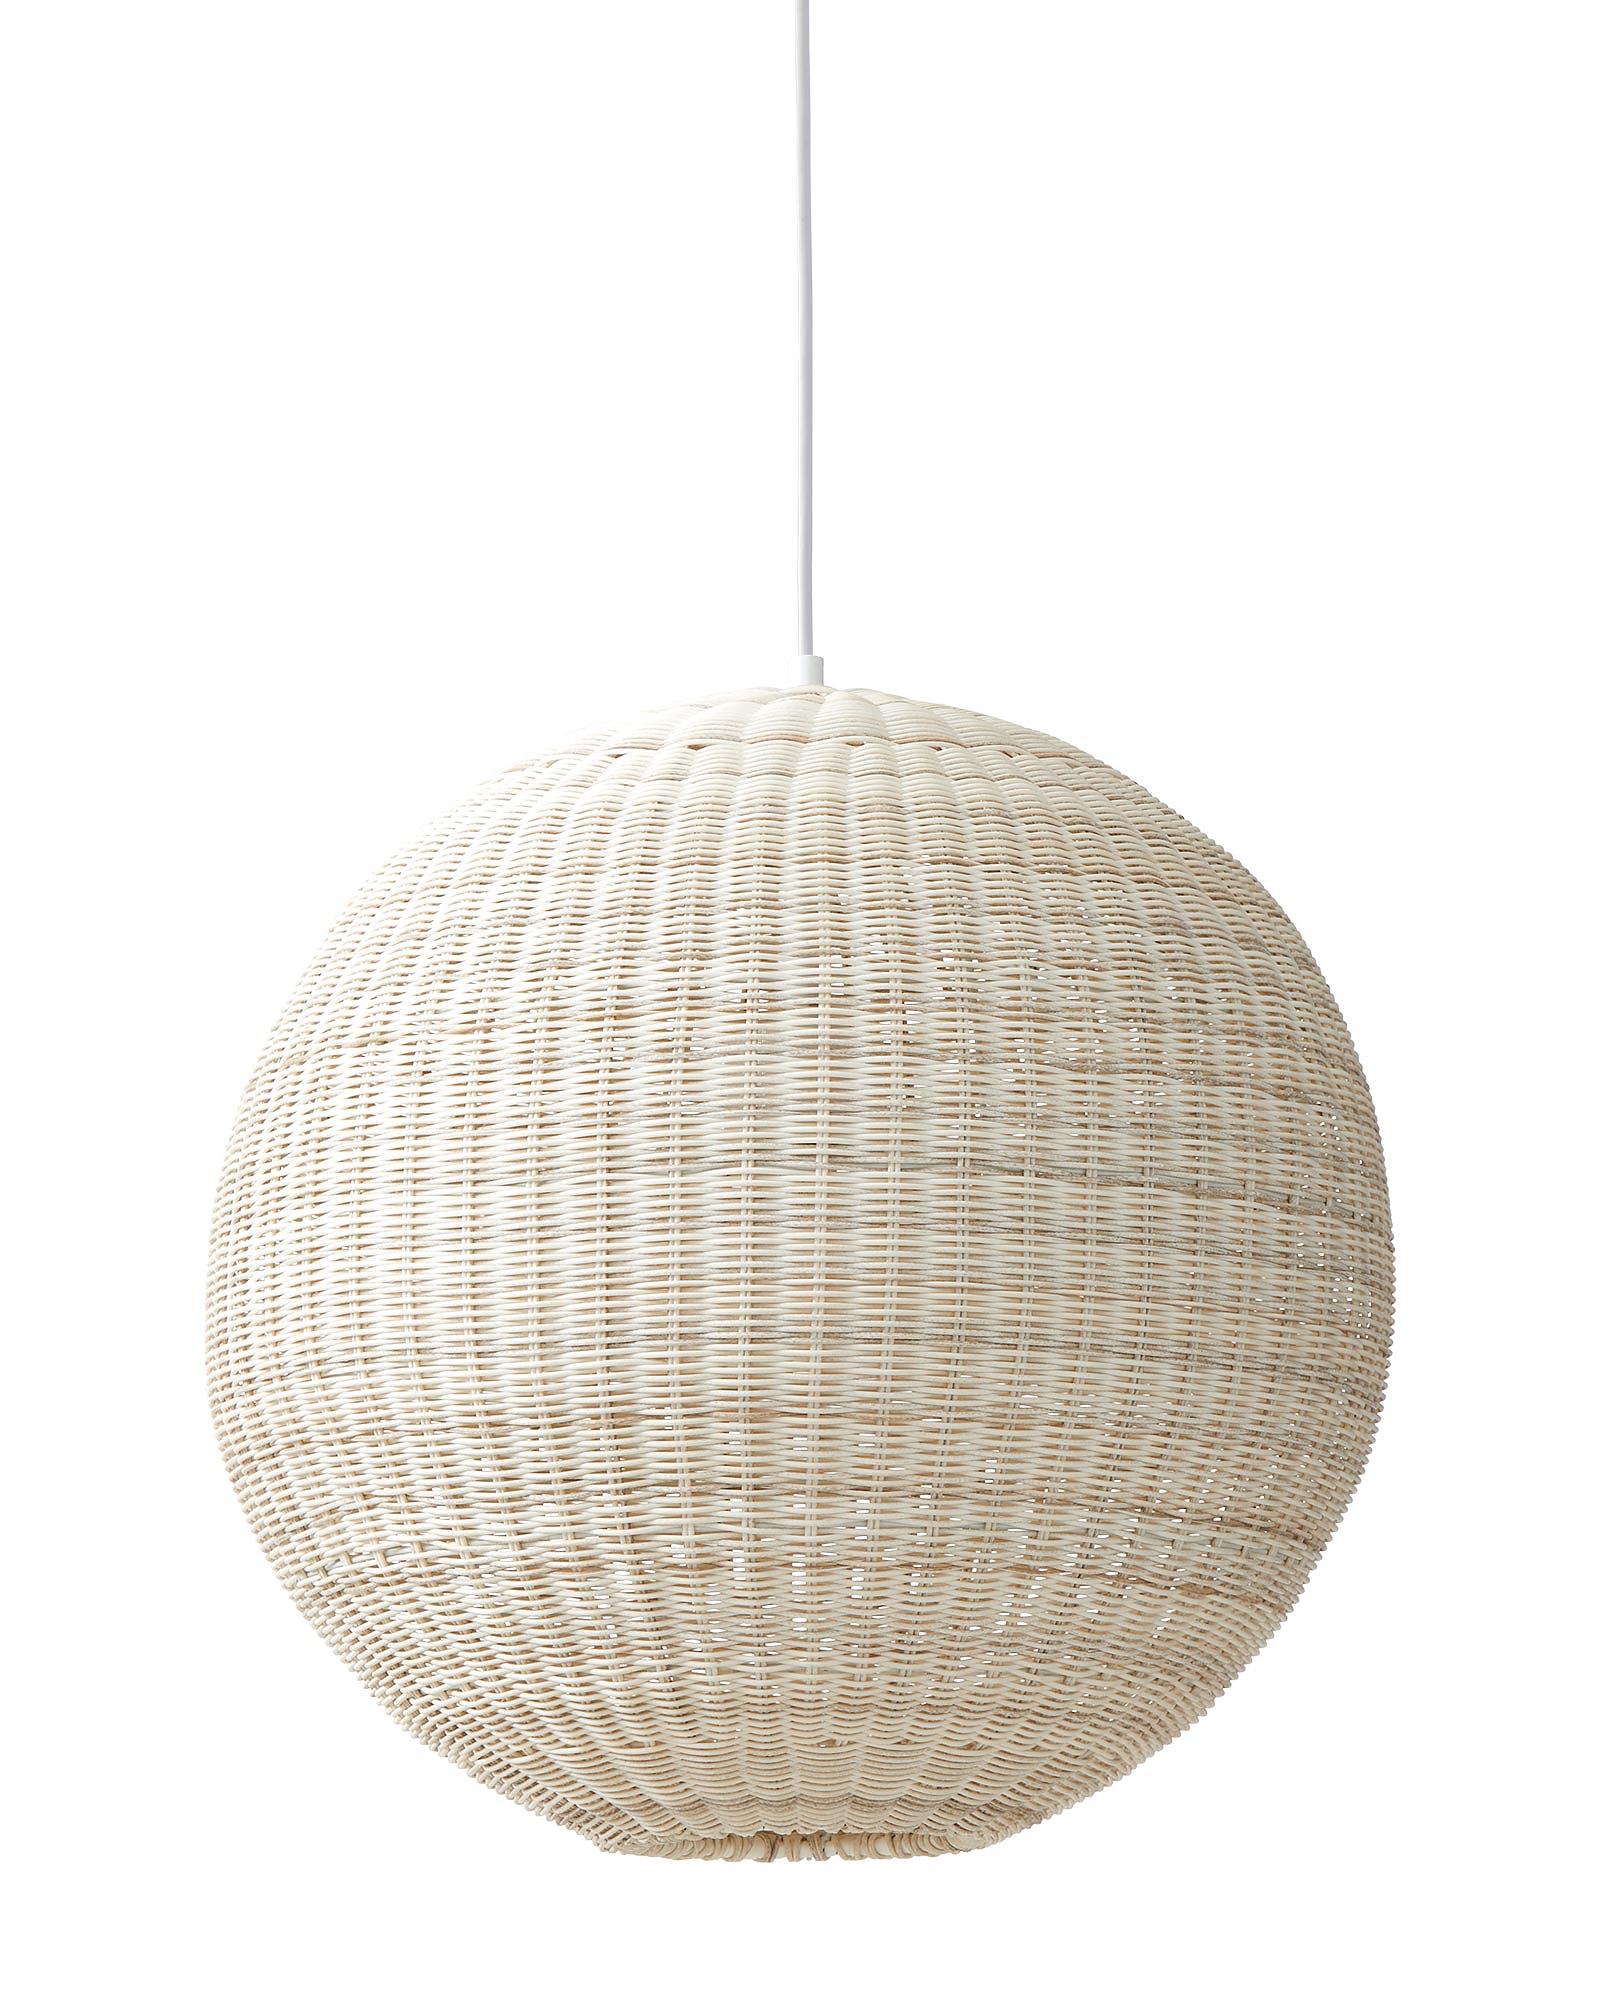 Lighting_Pacifica_Outdoor_Pendant_Large_Driftwood_LS-0530_BASE